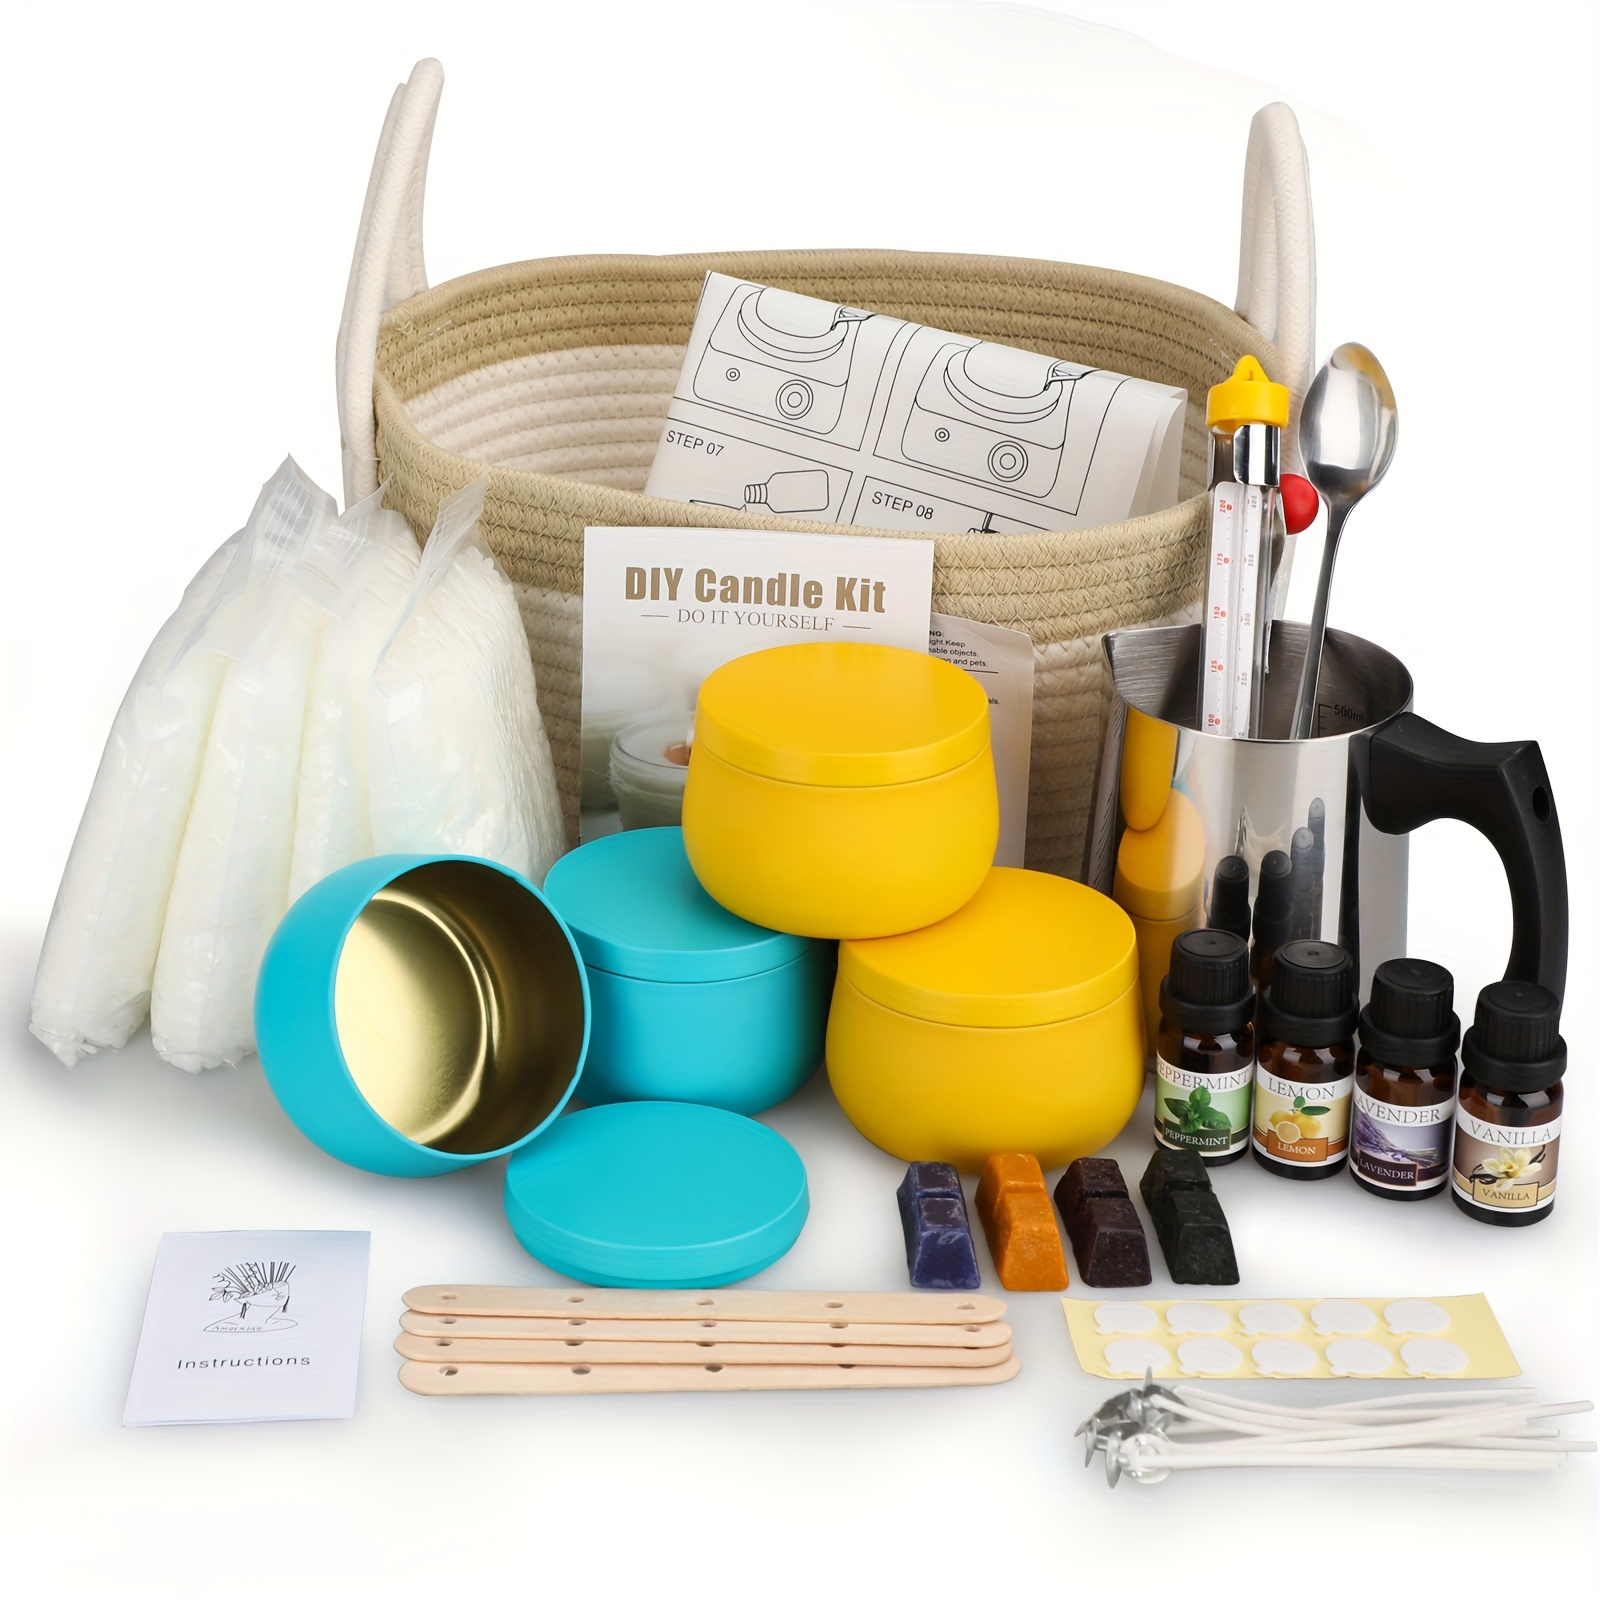 

Candle Making Kit, Beeswax Candle Making Supplies For Beginners With Woven Basket, Beeswax, Melting Pot, Wicks, Candle Tins, Essential Oil, Mixing Spoon, Dyes, Thermometer